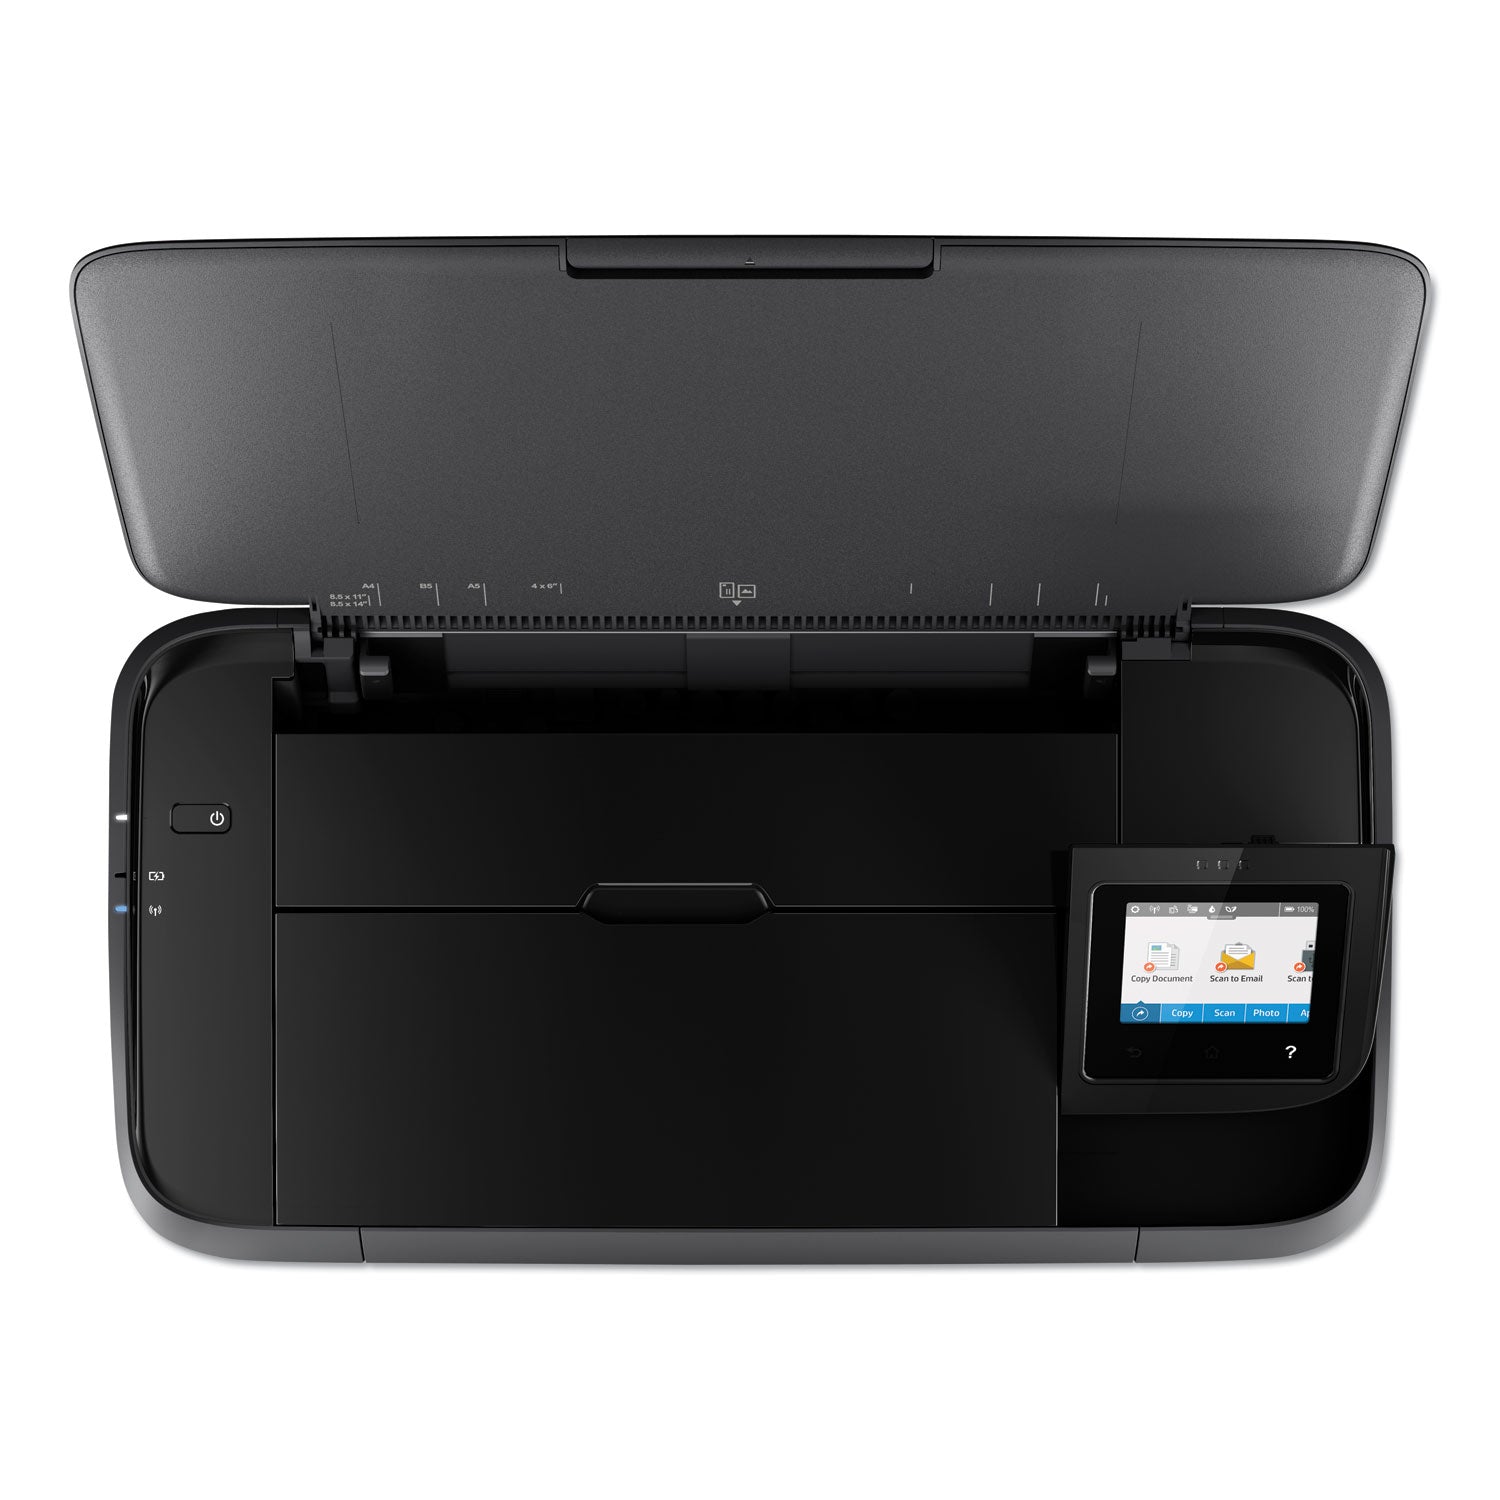 officejet-250-mobile-all-in-one-printer-copy-print-scan_hewcz992a - 5